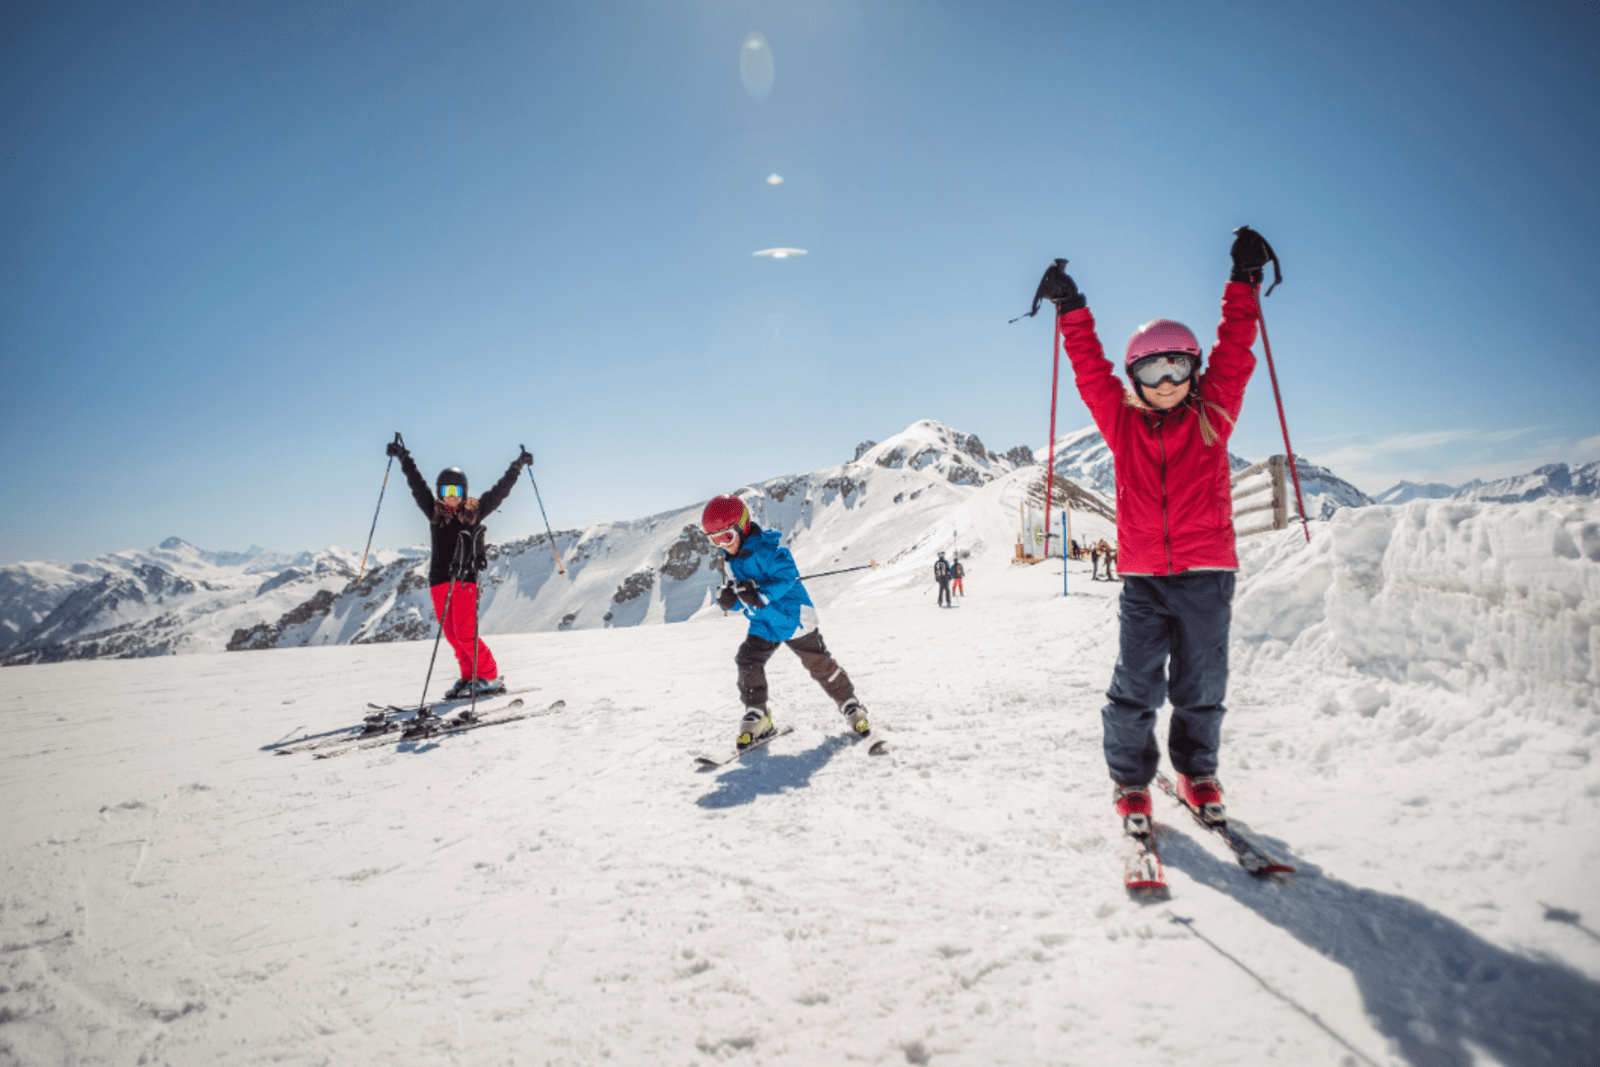 A family skiing during a winter vacation